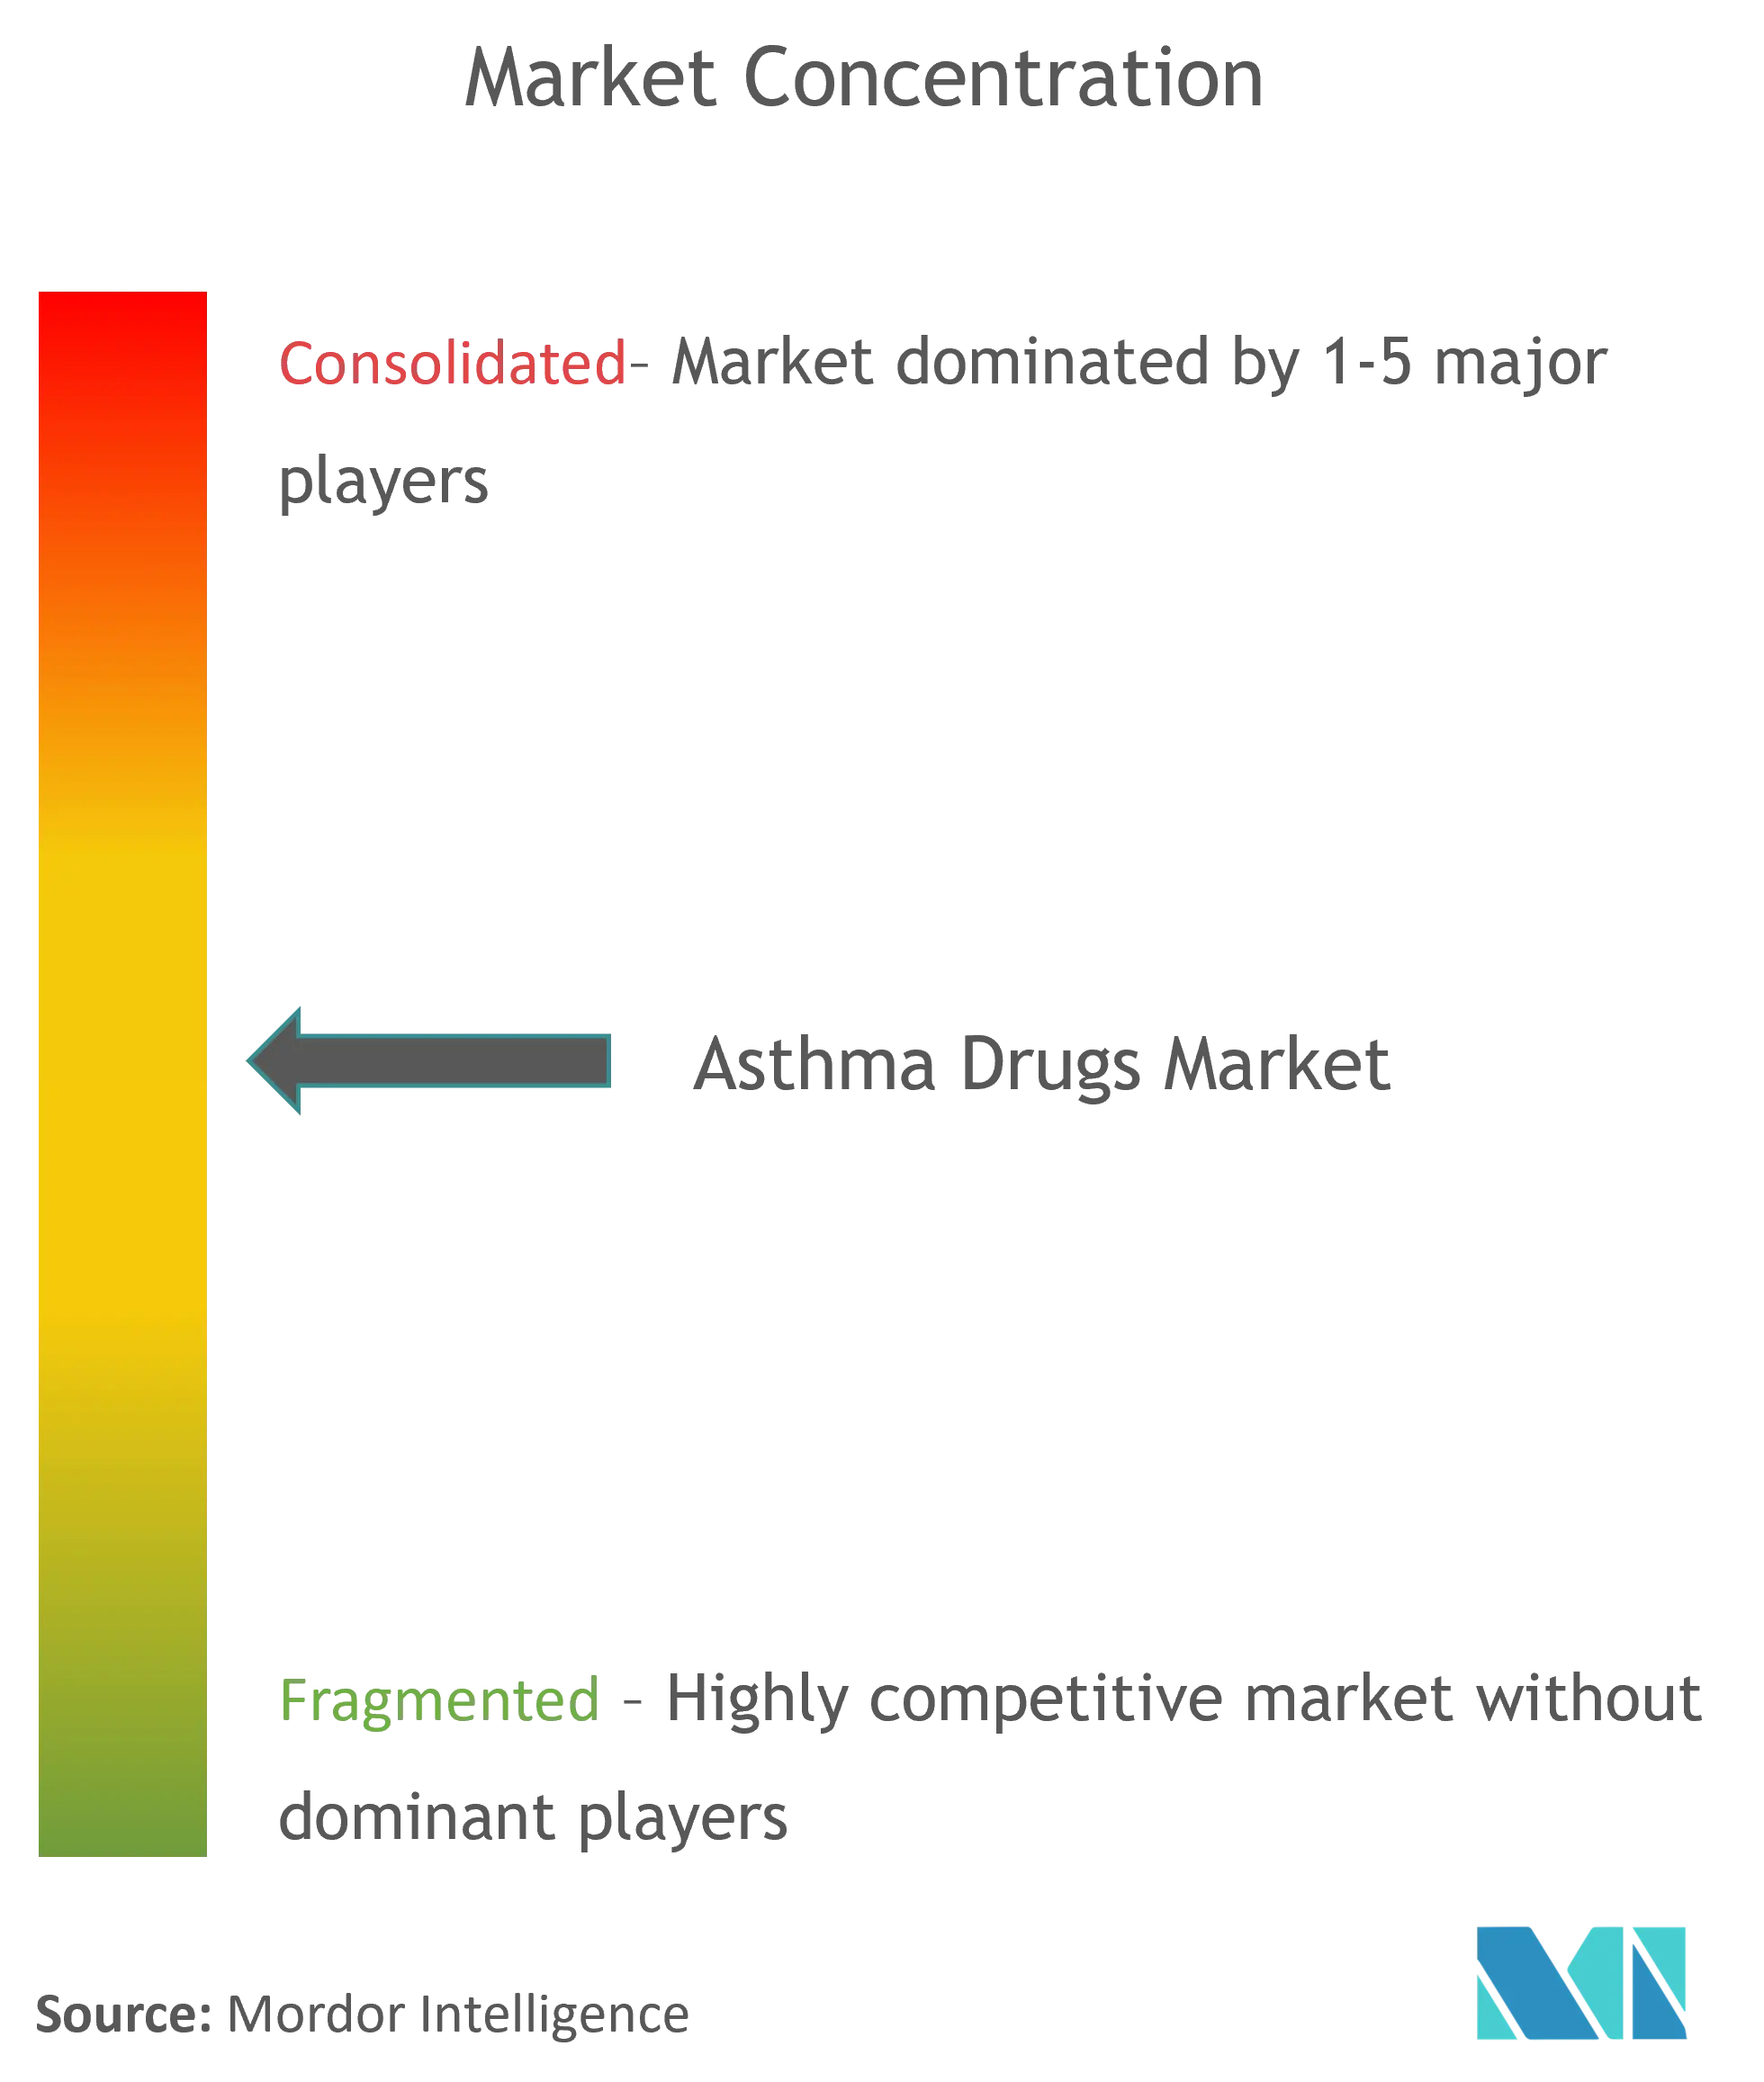 Asthma Drugs Market Concentration